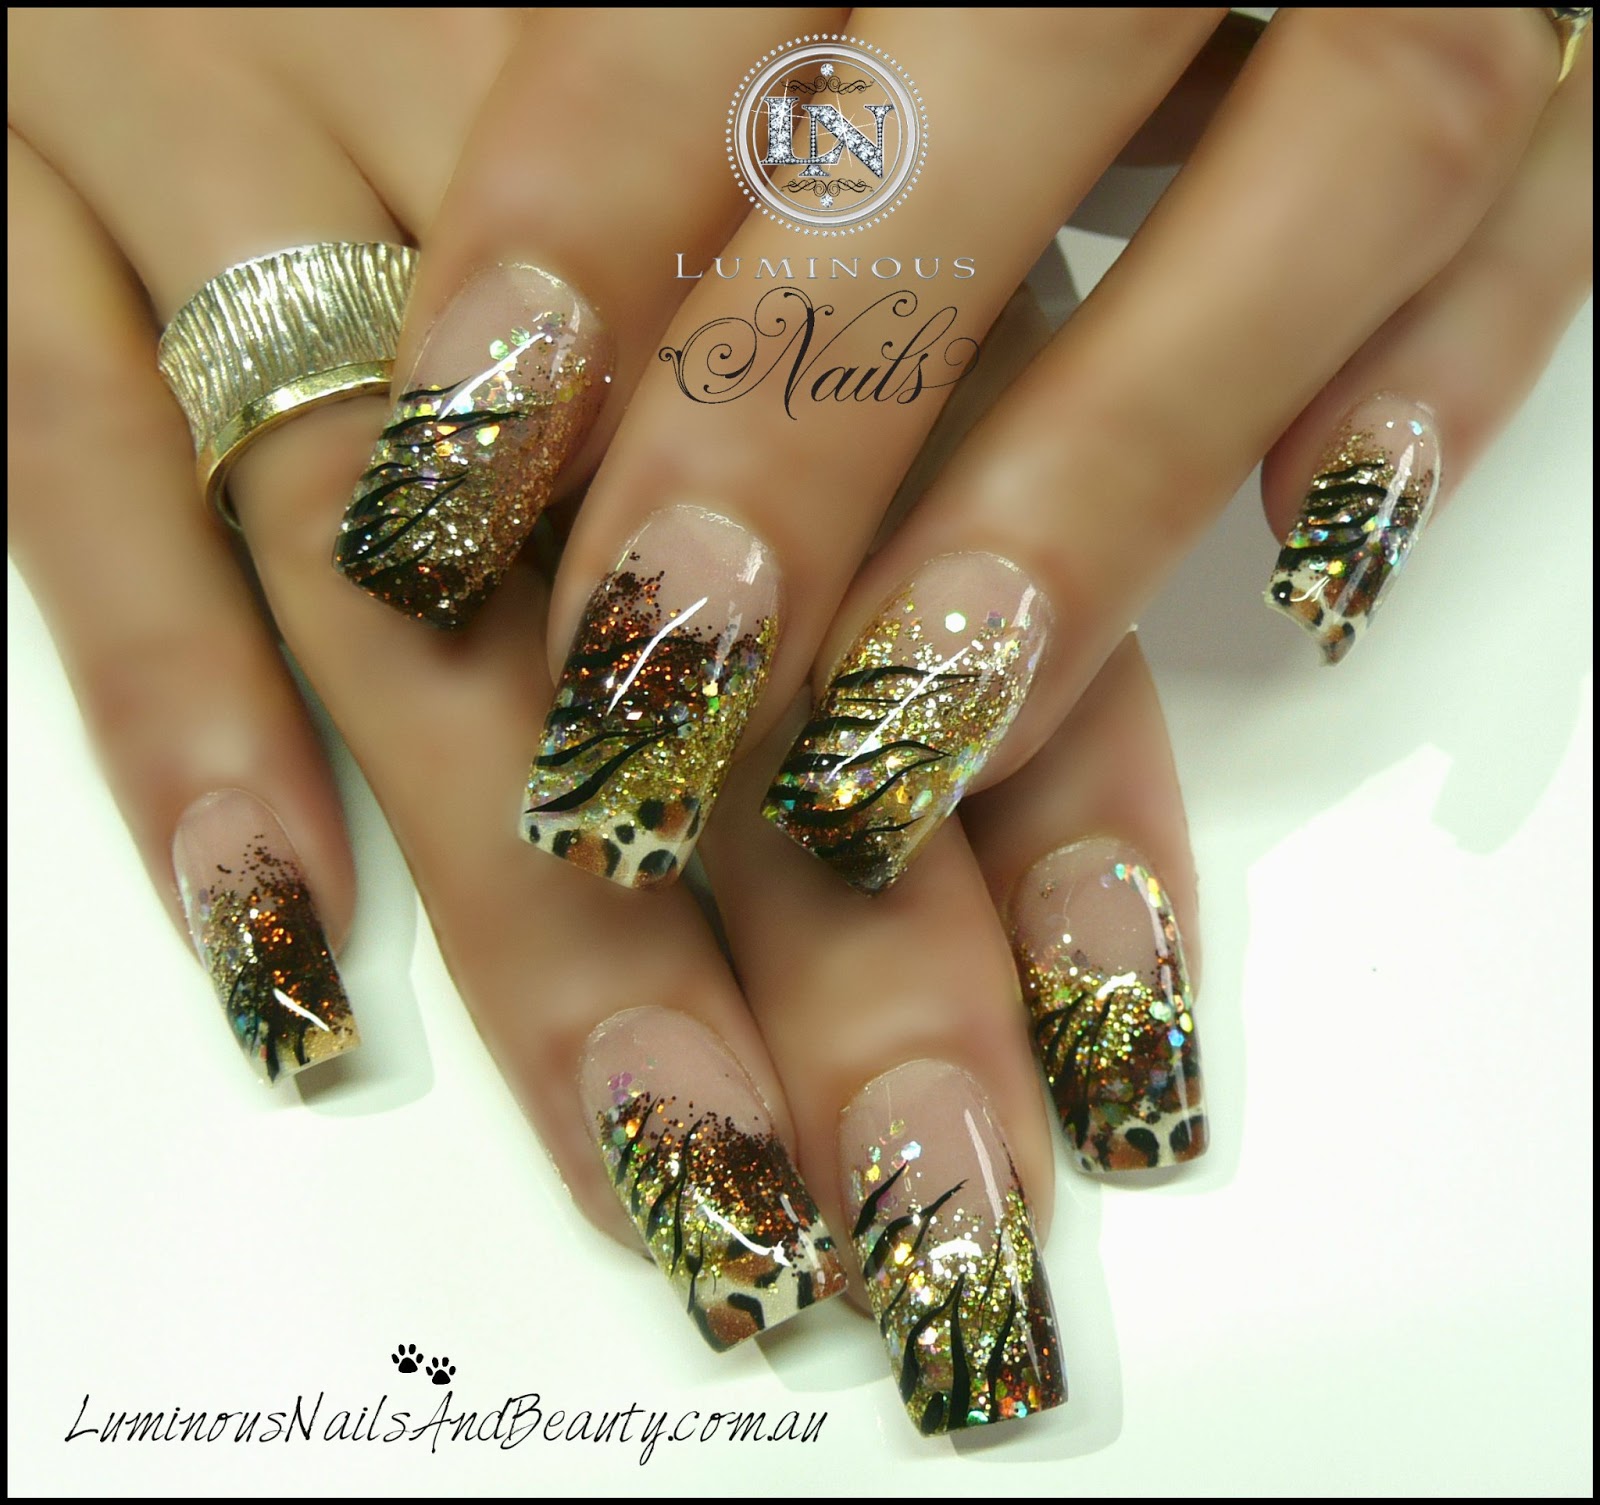 Luminous Nails & Beauty, Gold Coast Queensland. Acrylic Nails, Gel Nails, Sculptured Acrylic with Fortune, Shimmering Sand, Star Stand & Bronze Glitter, Copper, Cappuccino, Gold Black.